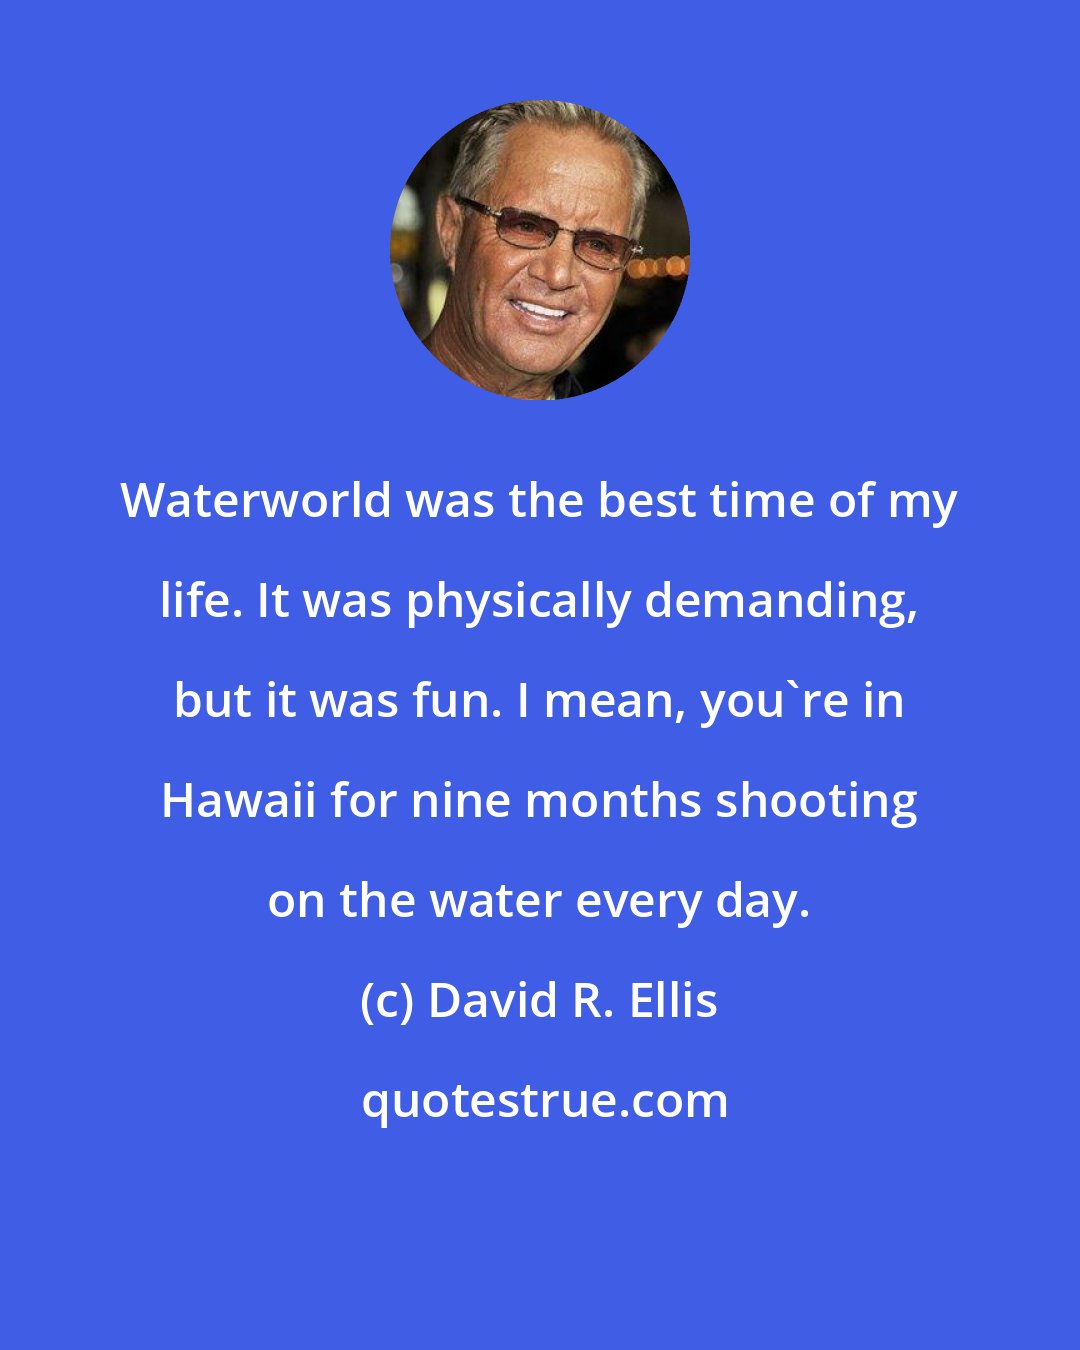 David R. Ellis: Waterworld was the best time of my life. It was physically demanding, but it was fun. I mean, you're in Hawaii for nine months shooting on the water every day.